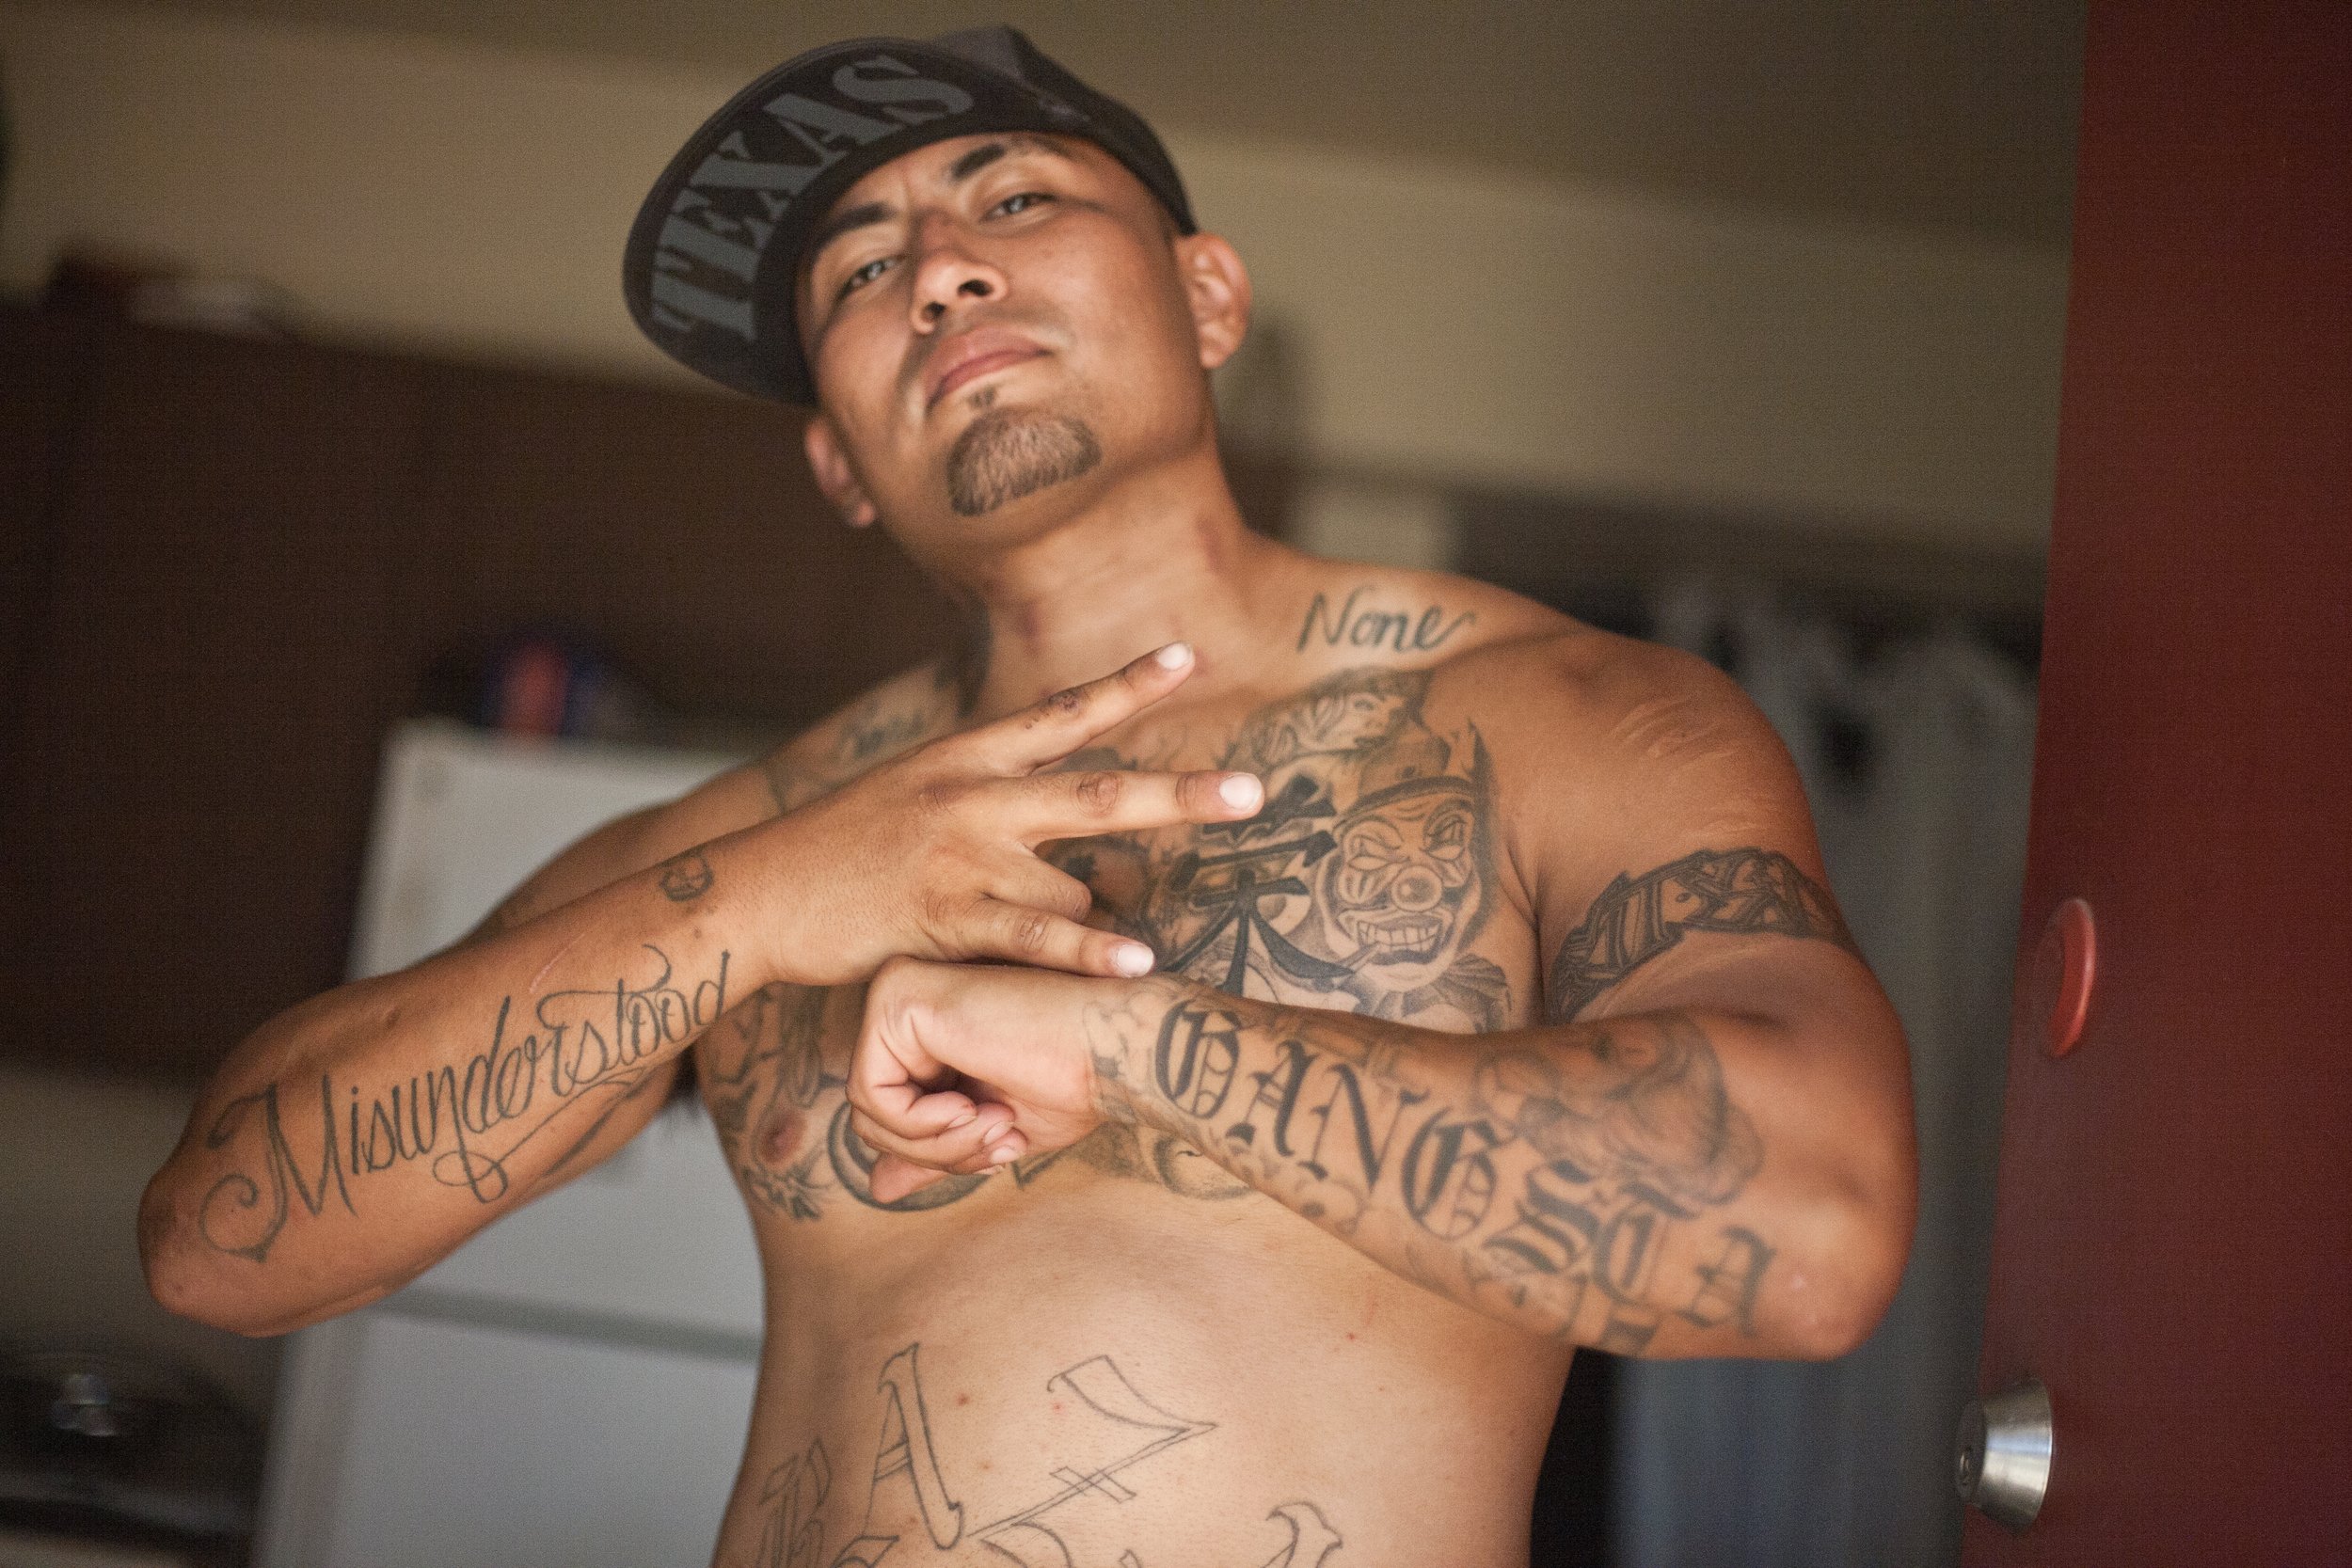 Gangster With Tattoos Over 1679 RoyaltyFree Licensable Stock Photos   Shutterstock